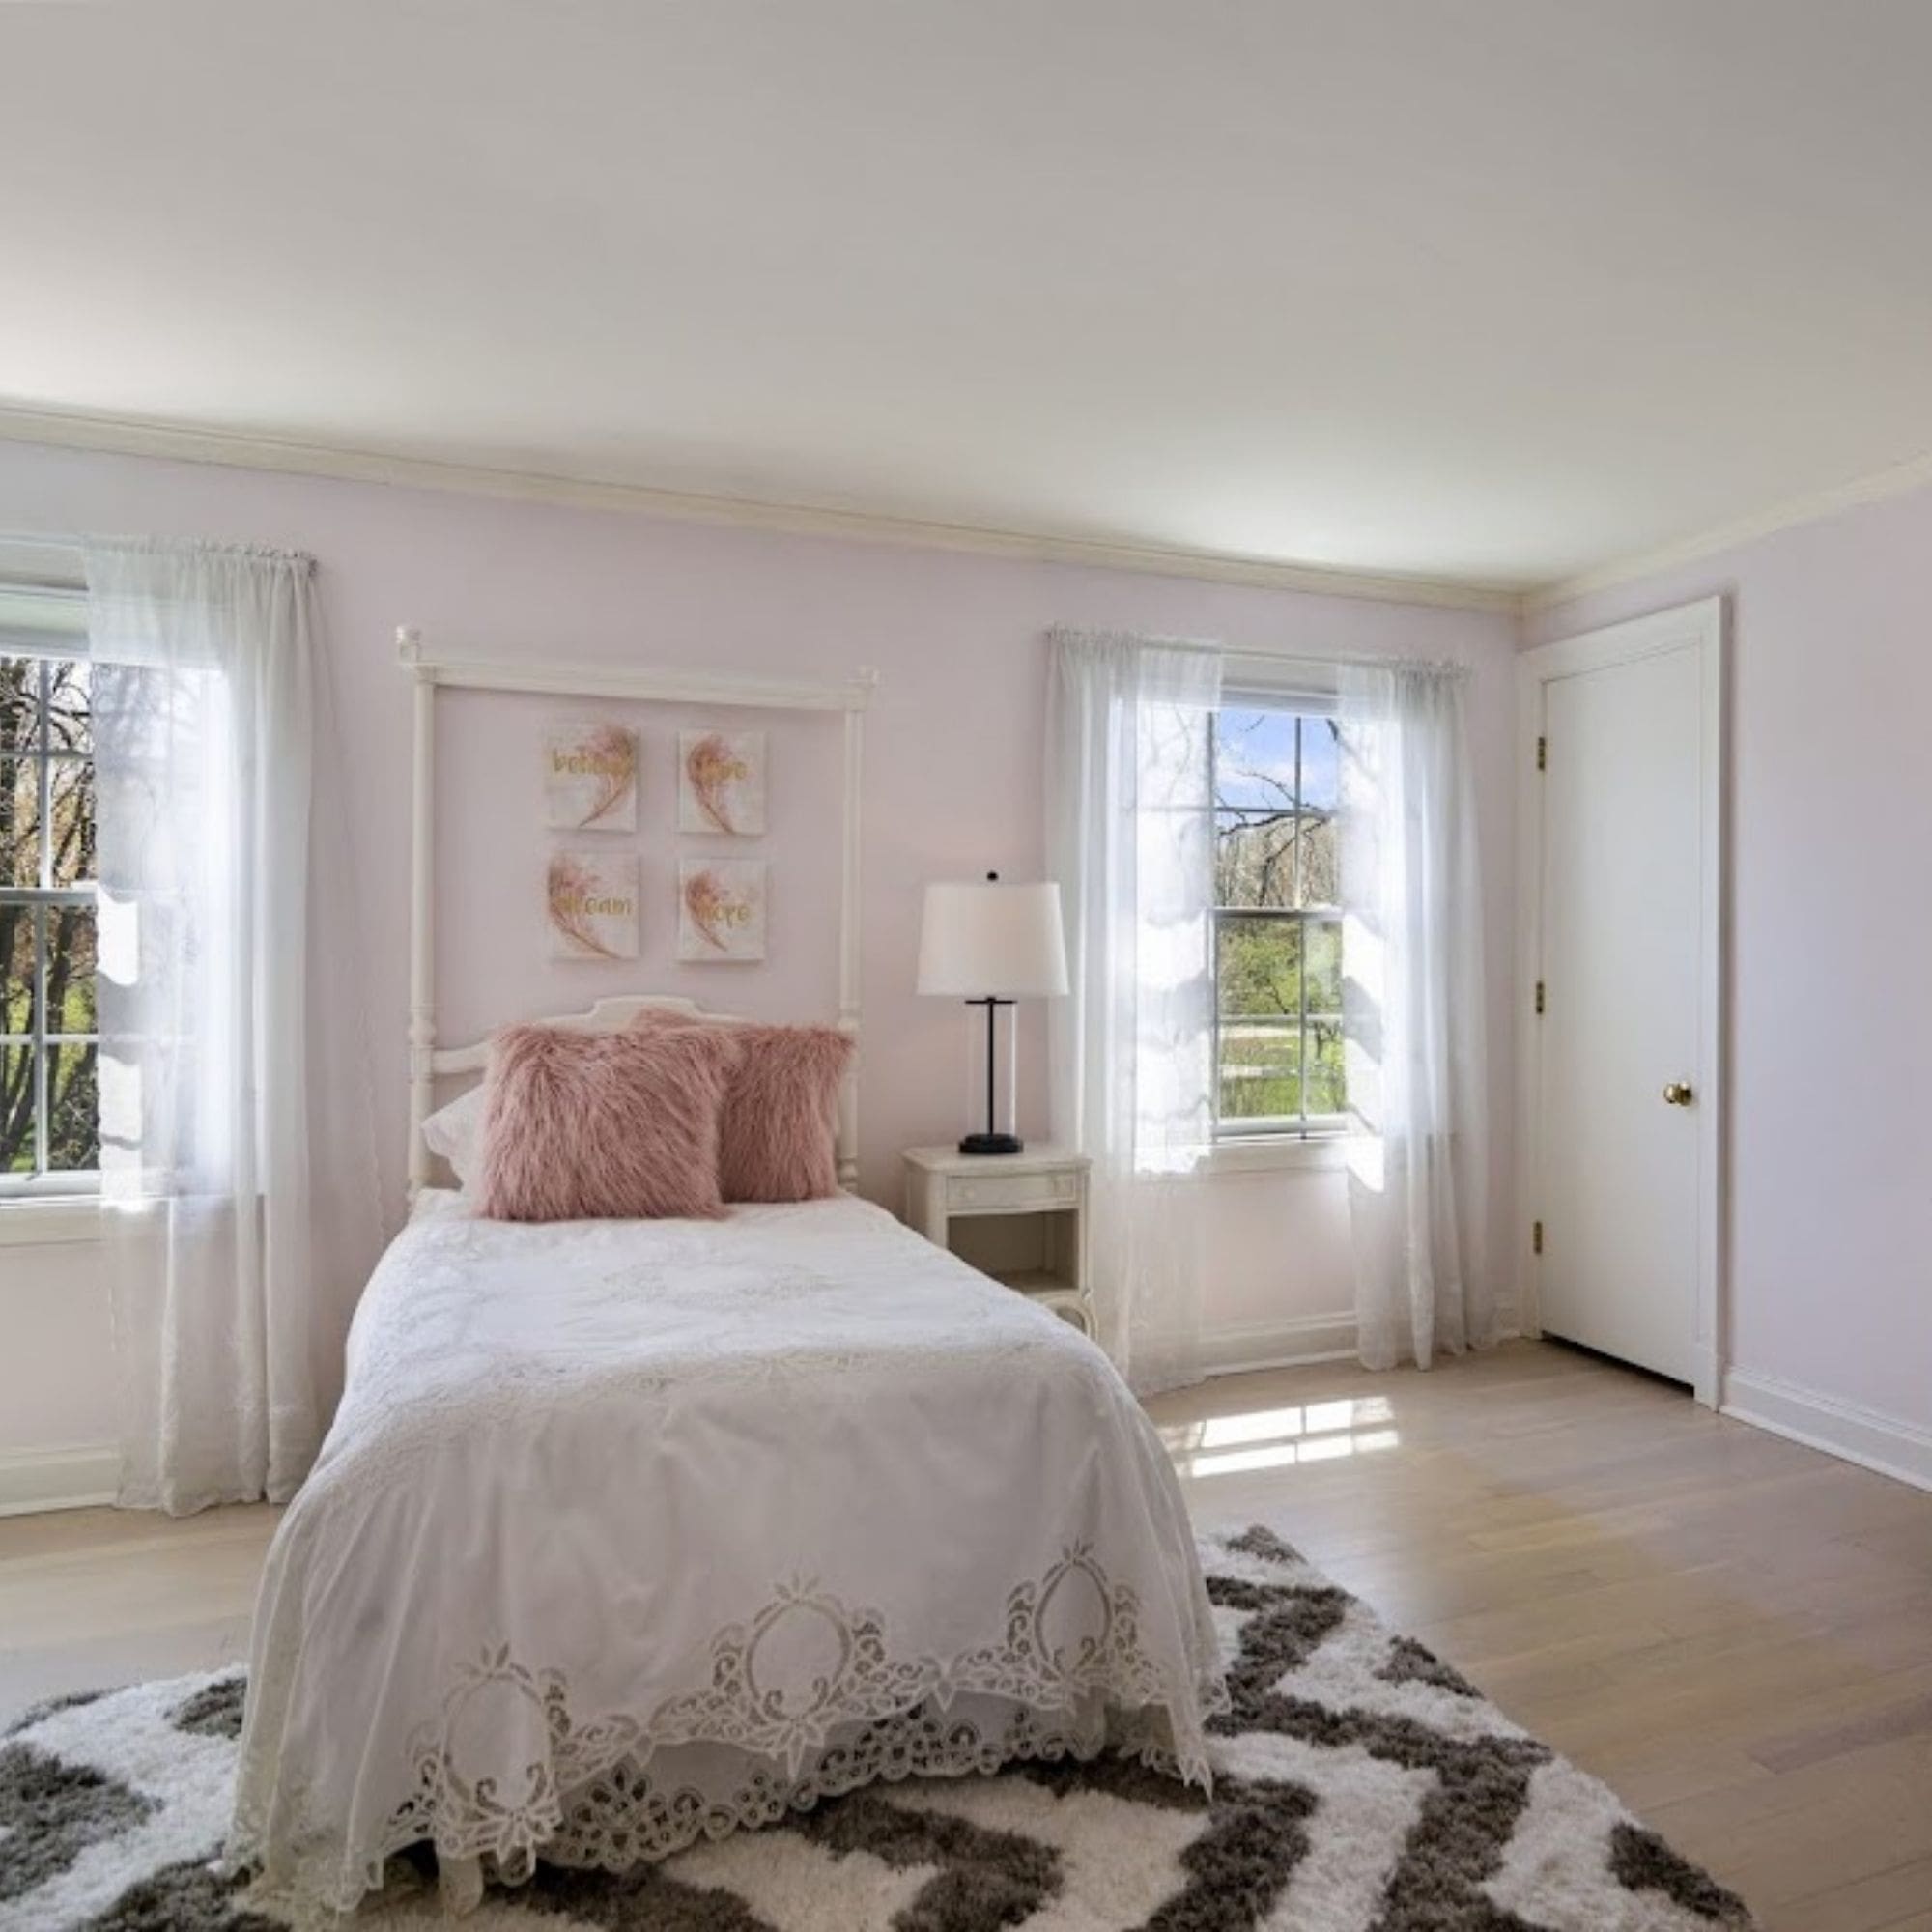 A stylish home staged bedroom showcasing a pink bed against a backdrop of clean white walls.